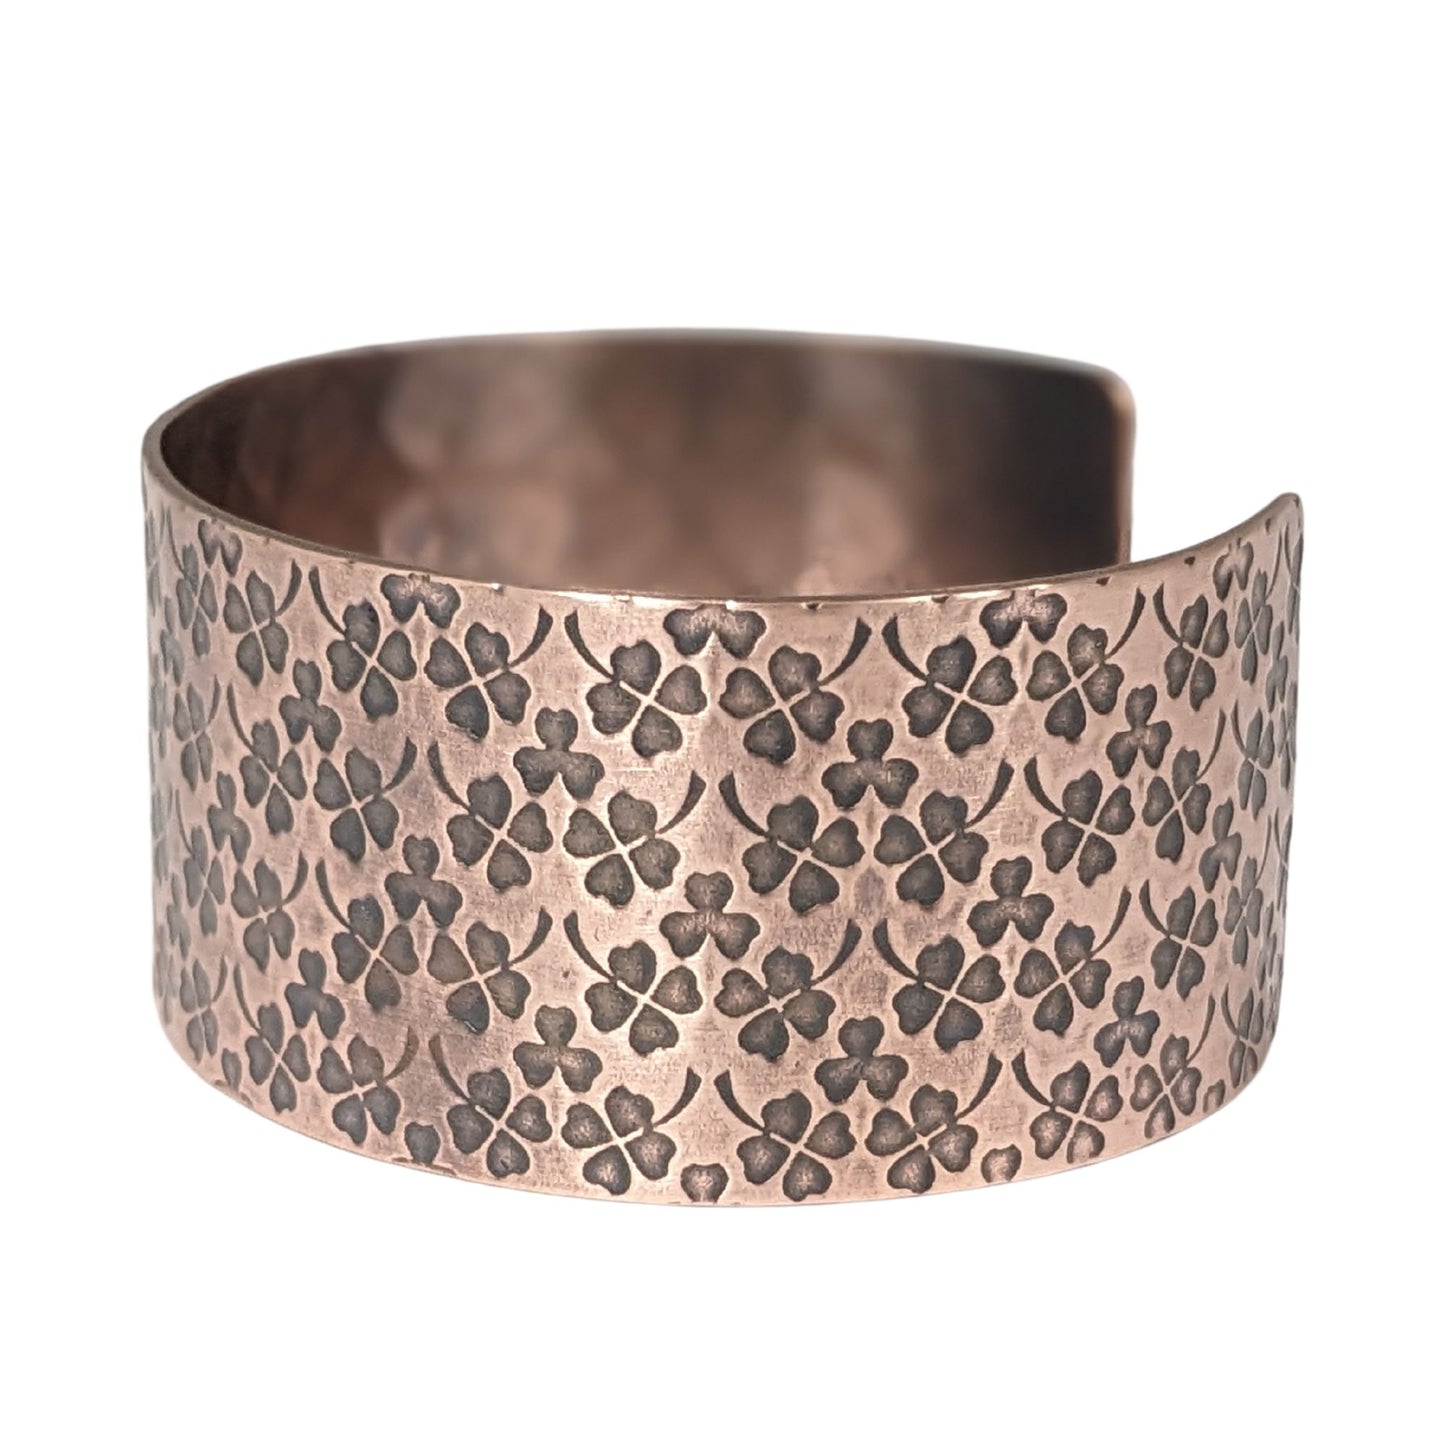 Copper cuff bracelet covered in impressions of small four leaf clovers.